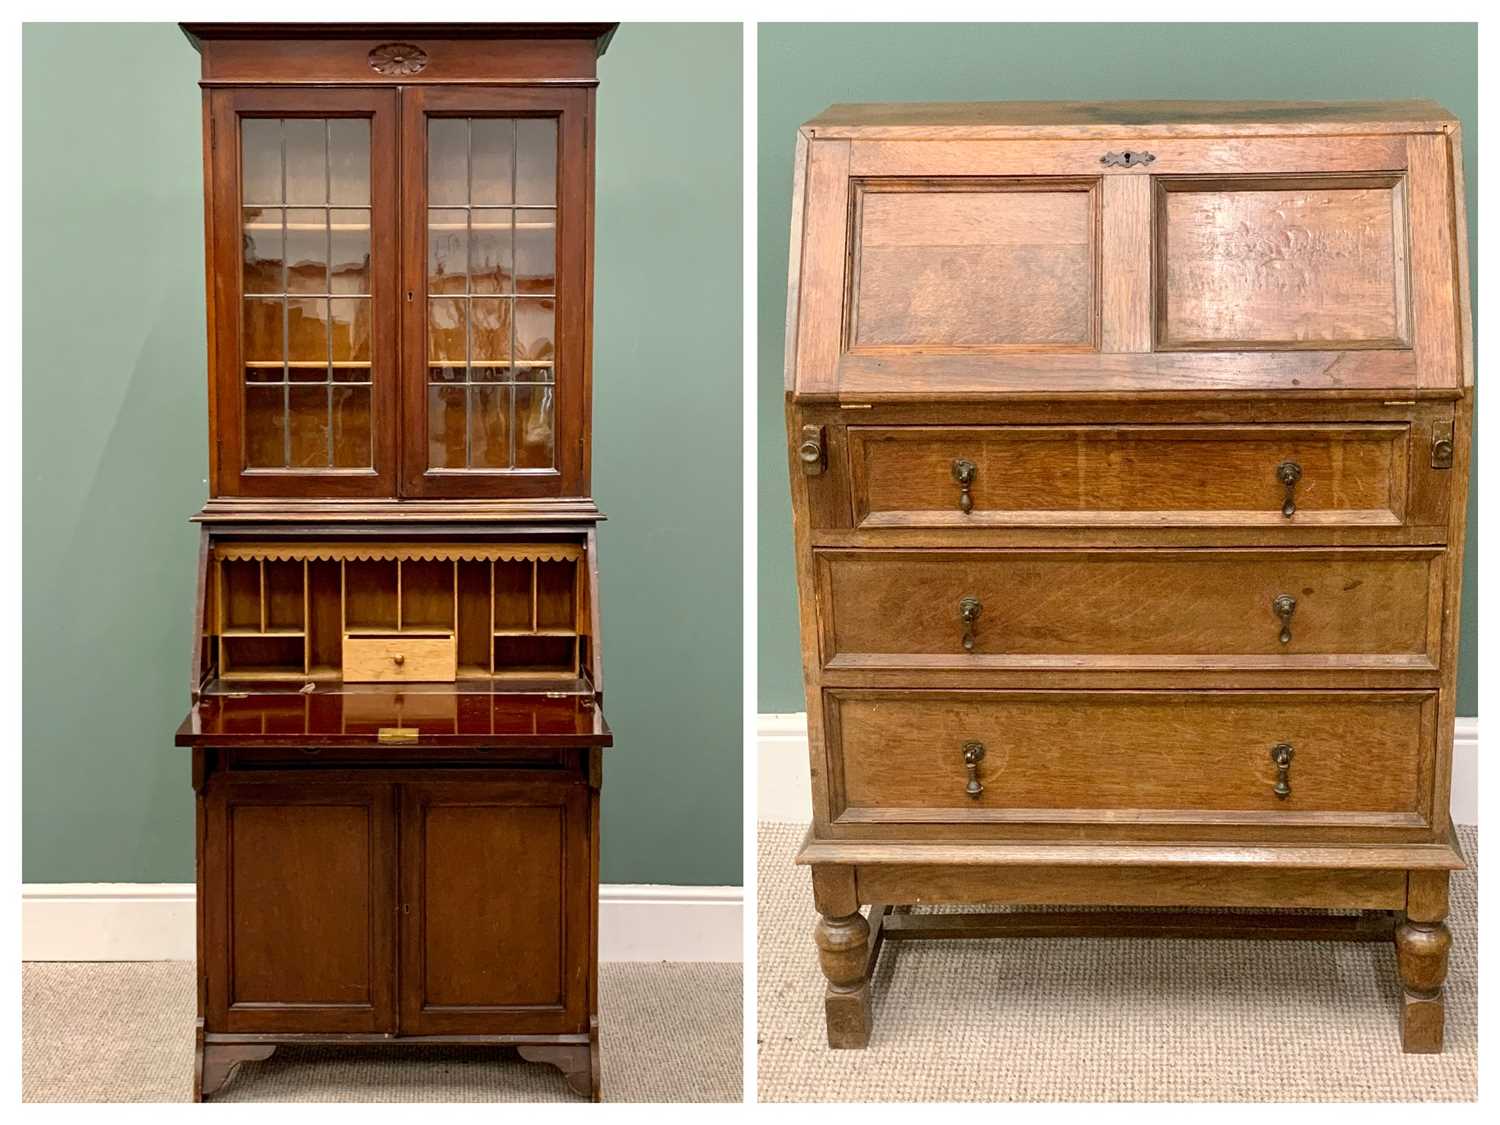 AN EDWARDIAN MAHOGANY BUREAU BOOKCASE having a twin door leaded-glass upper section over a fall